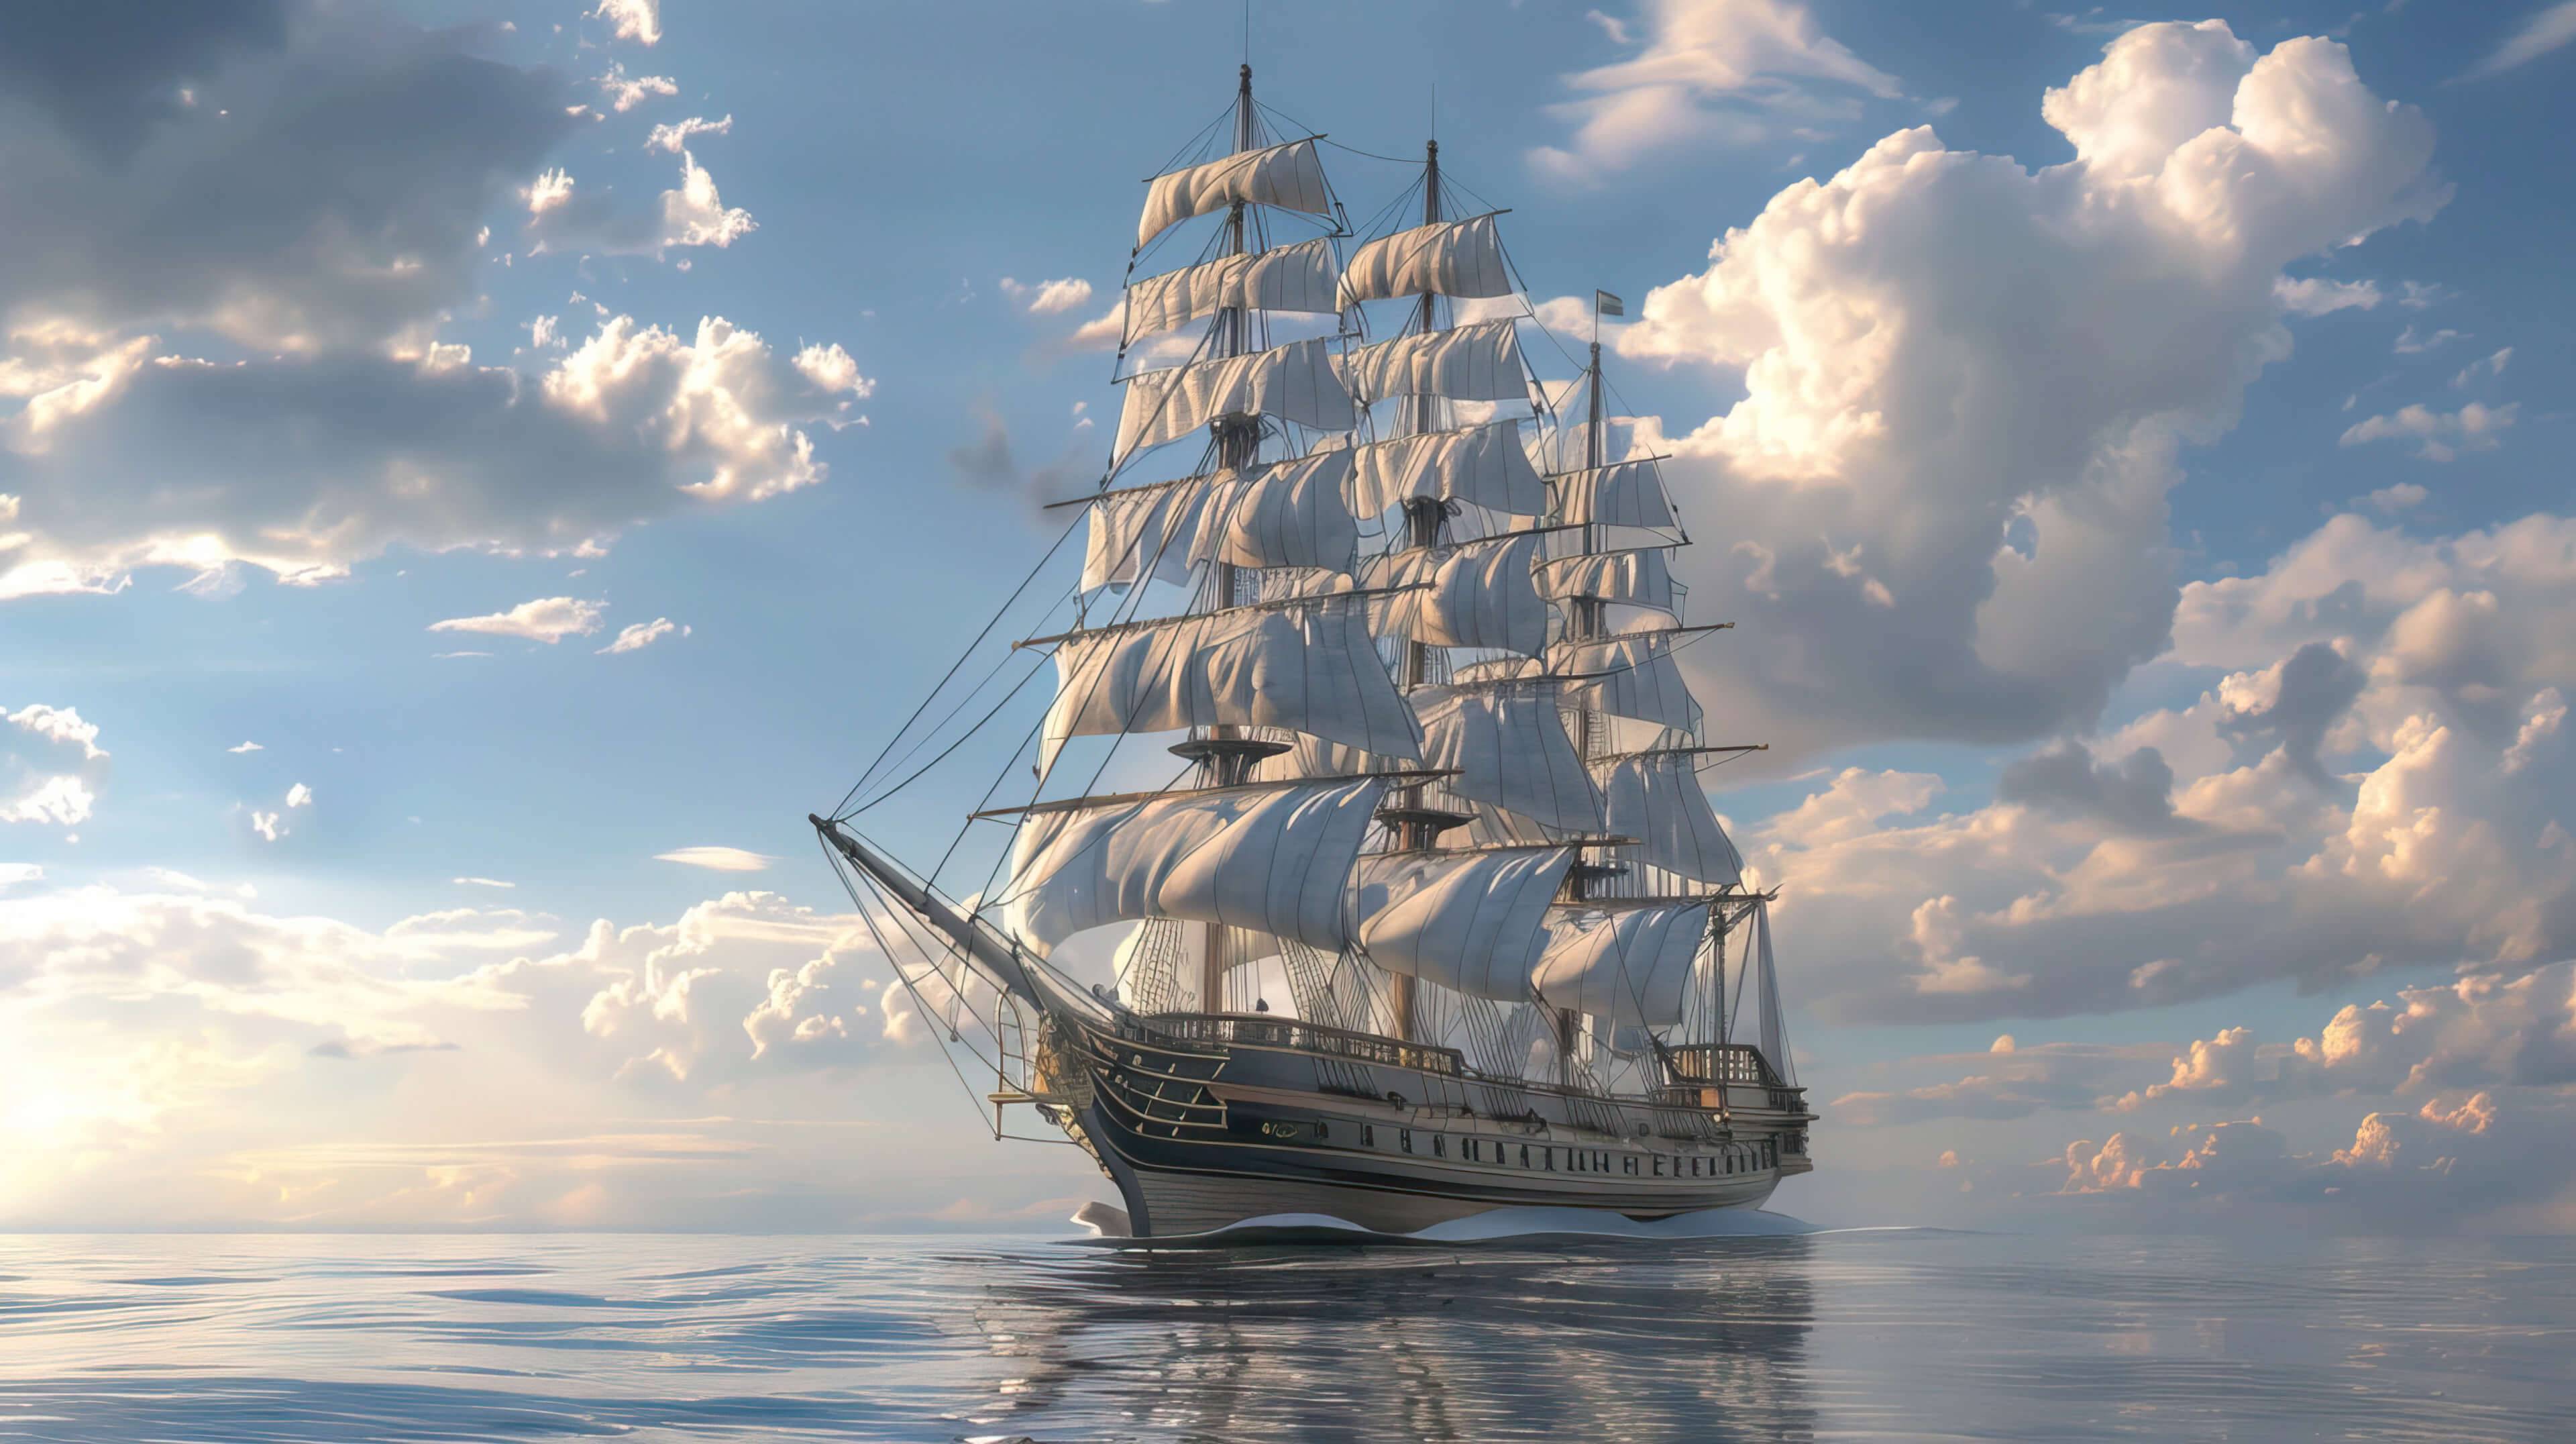 A grand tall ship with sails unfurled evoking a bygone age of maritime exploration and adventure on the open waters